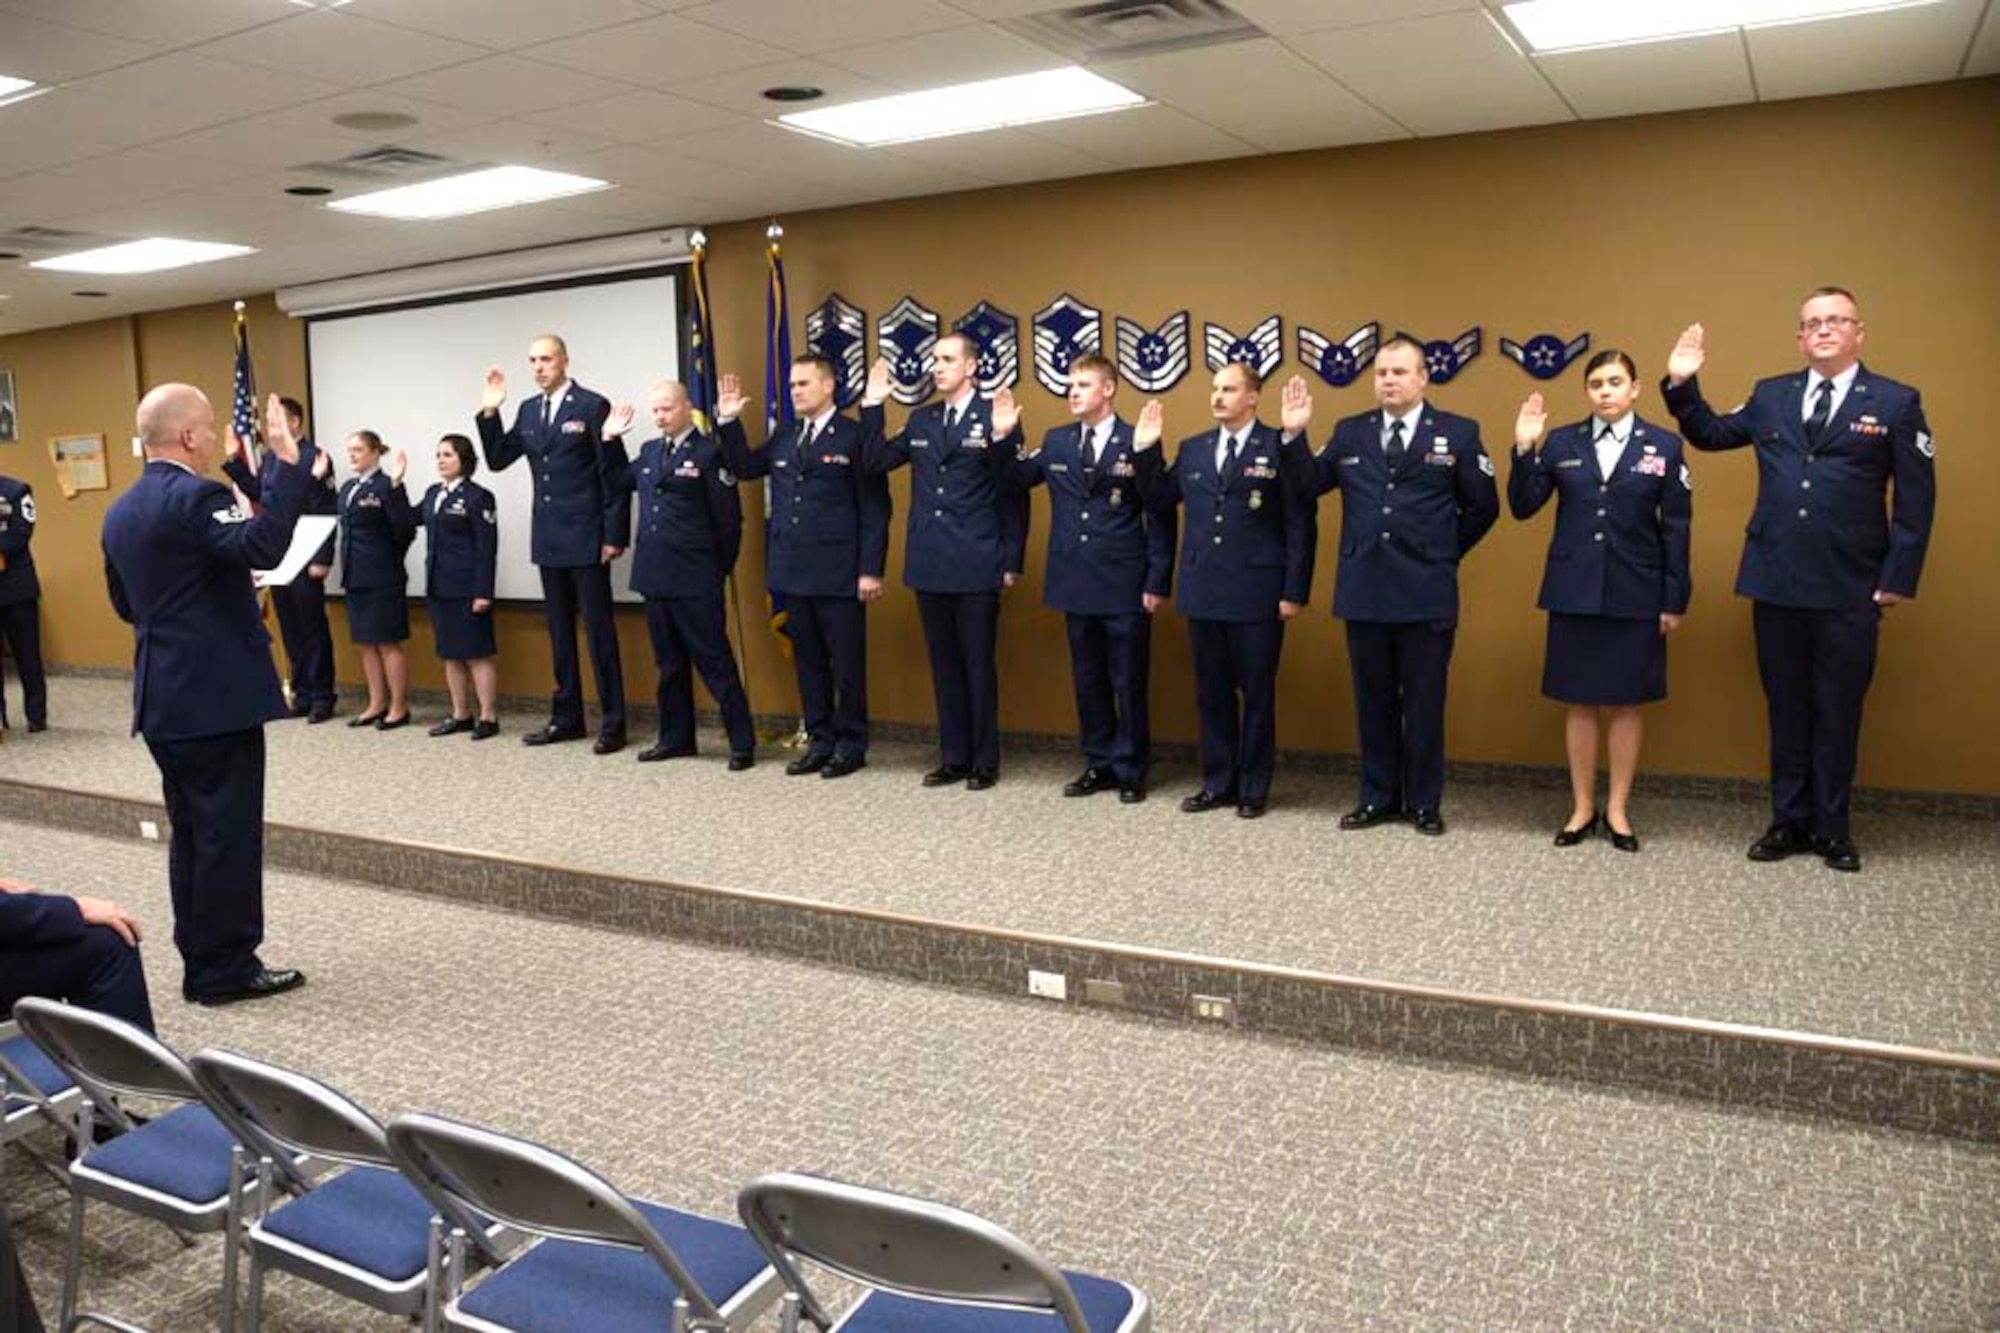 Newly promoted staff sergeants take the oath during the NCO Induction Ceremony held at the 120th Airlift Wing in Great Falls, Mont. Dec. 4, 2016. (U.S. Air National Guard photo/Senior Master Sgt. Eric Peterson)